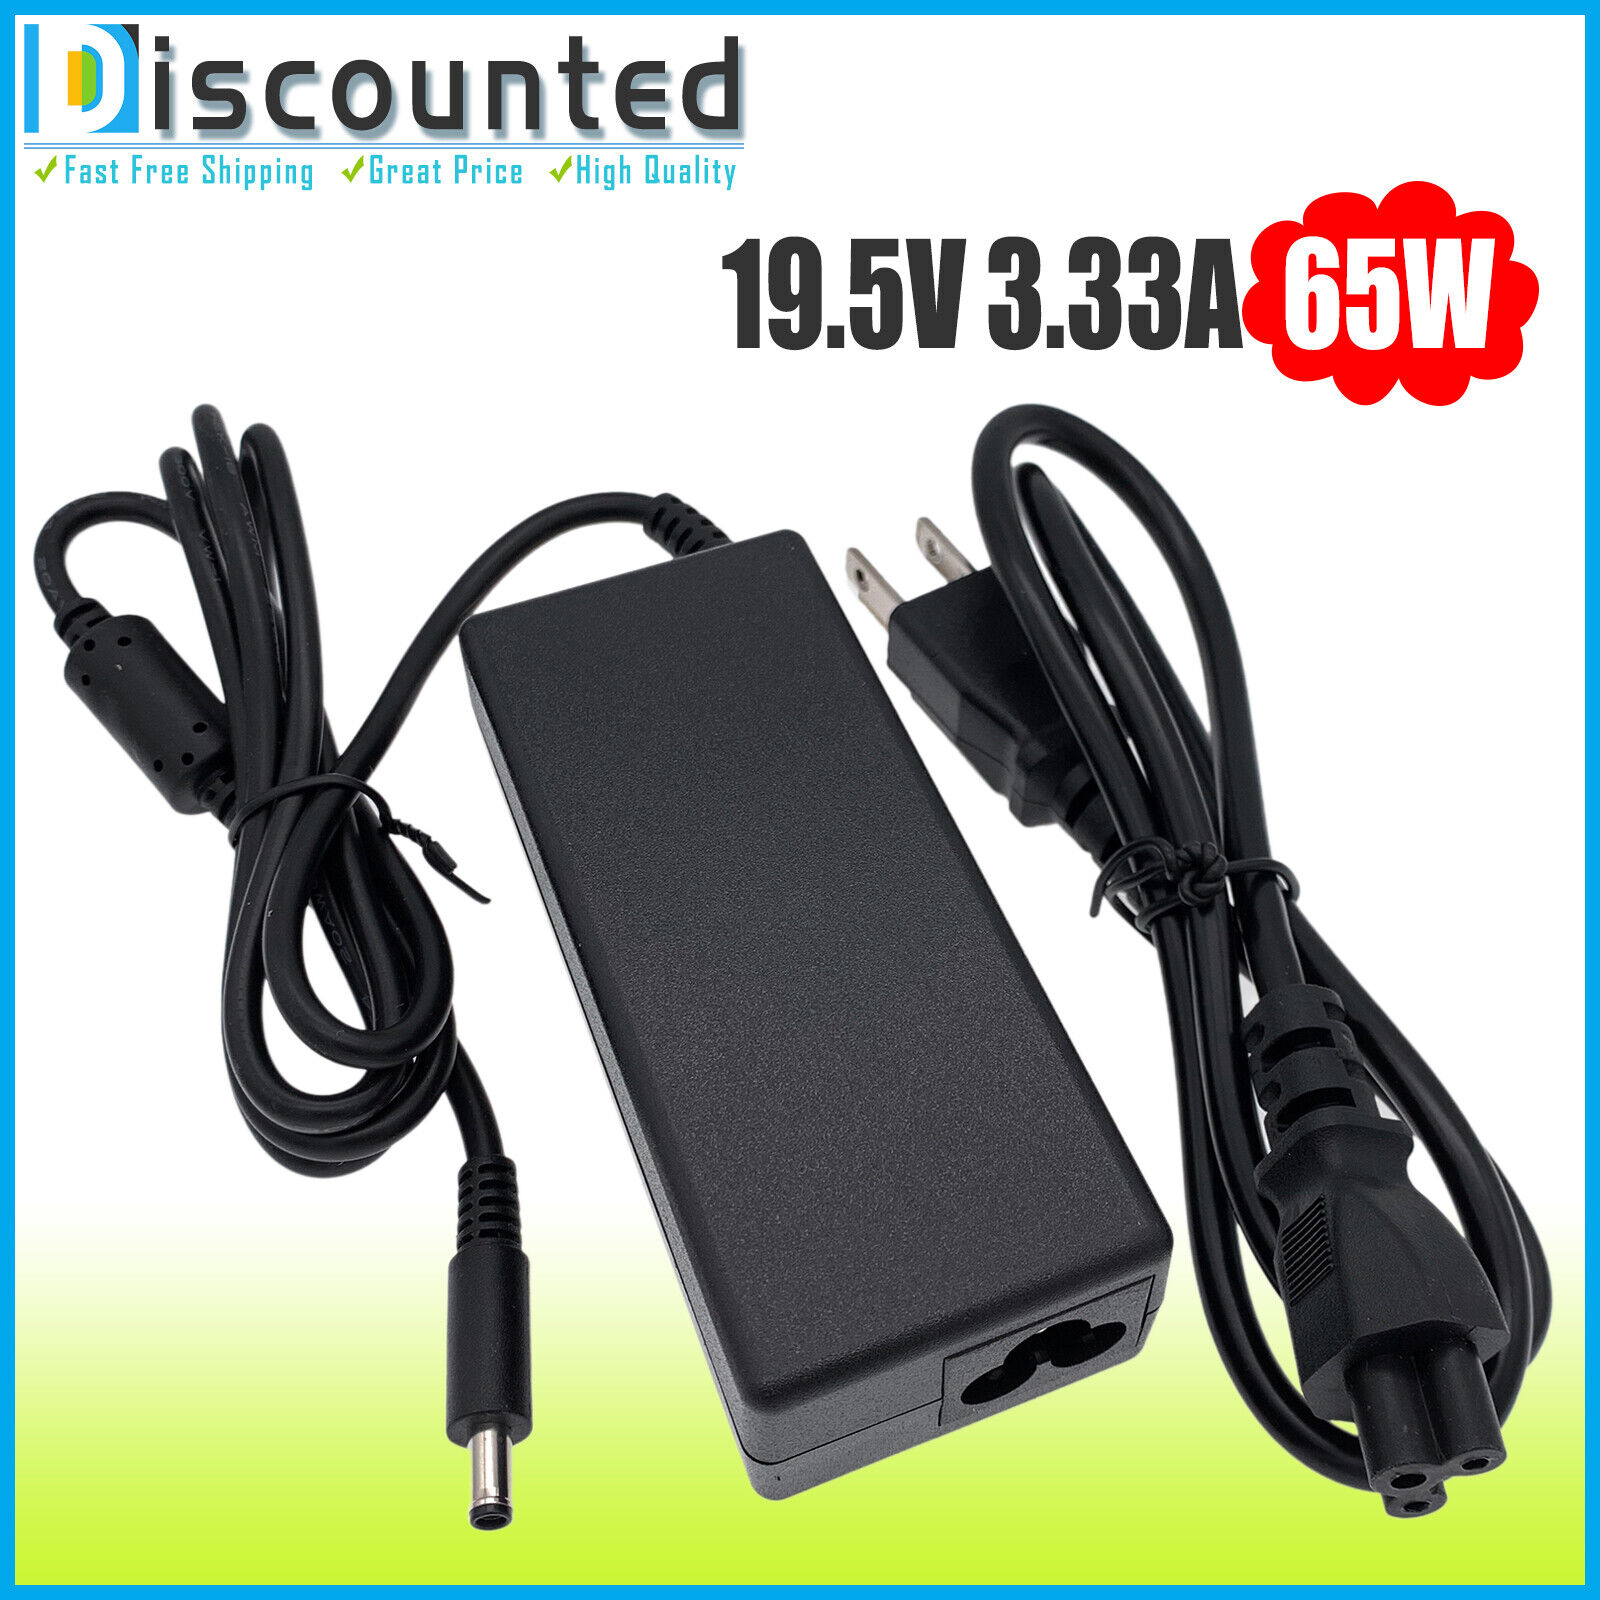 Charger For HP Pavilion 17-g133cy 17-g133ds 17-g134cy AC Adapter Power Cord